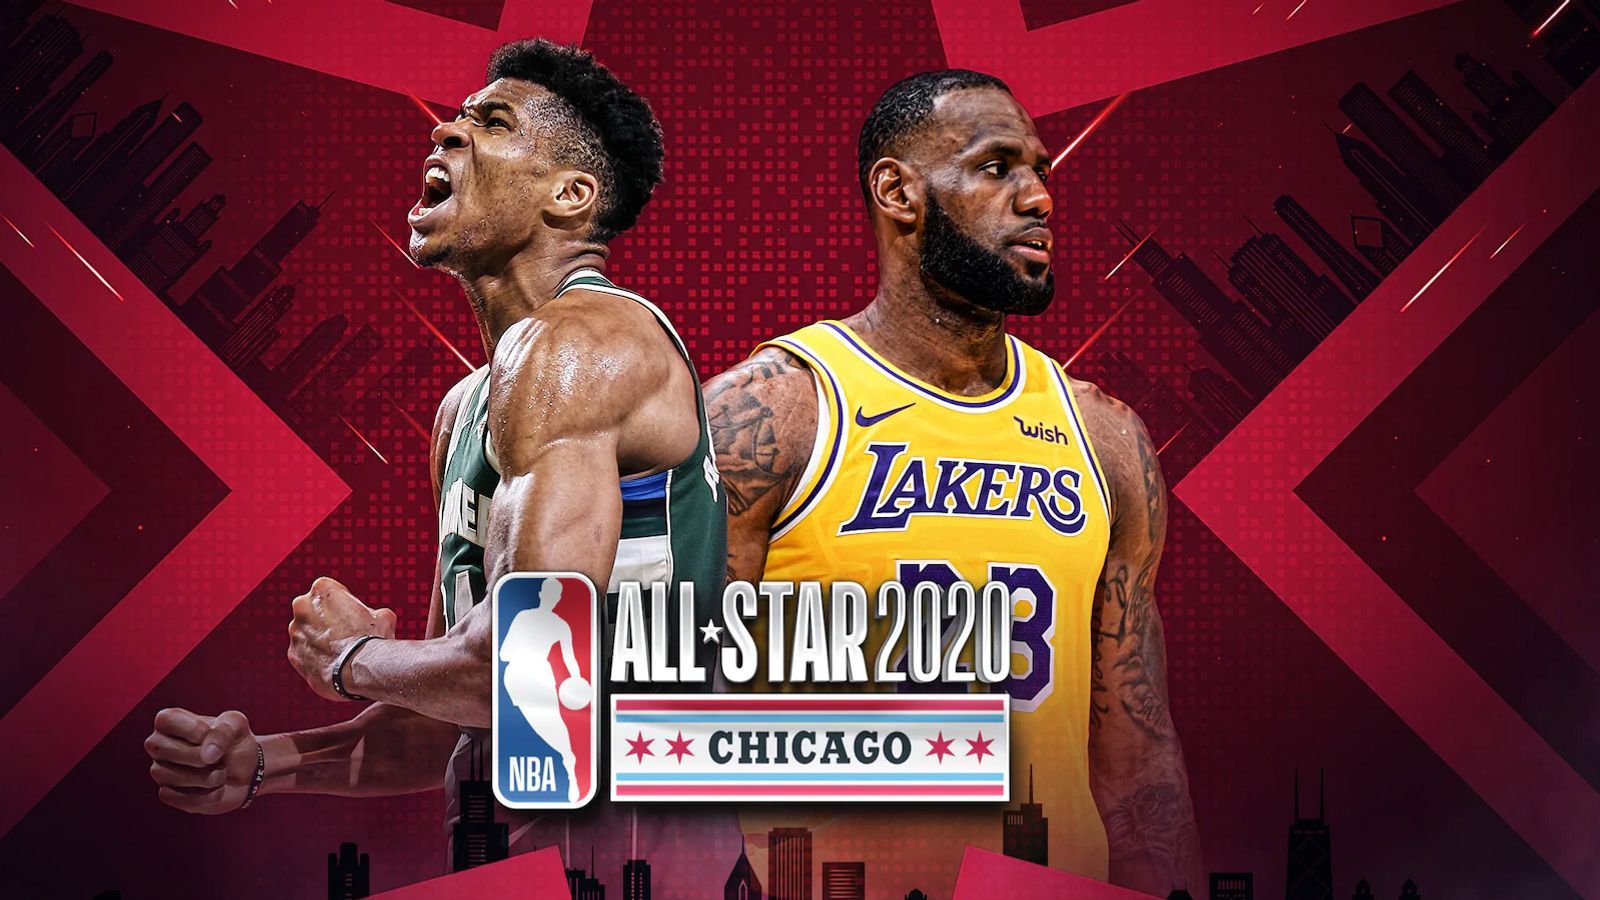 All Star 2020: LeBron James And Giannis Antetokoumpo Draft All Star Game Rosters